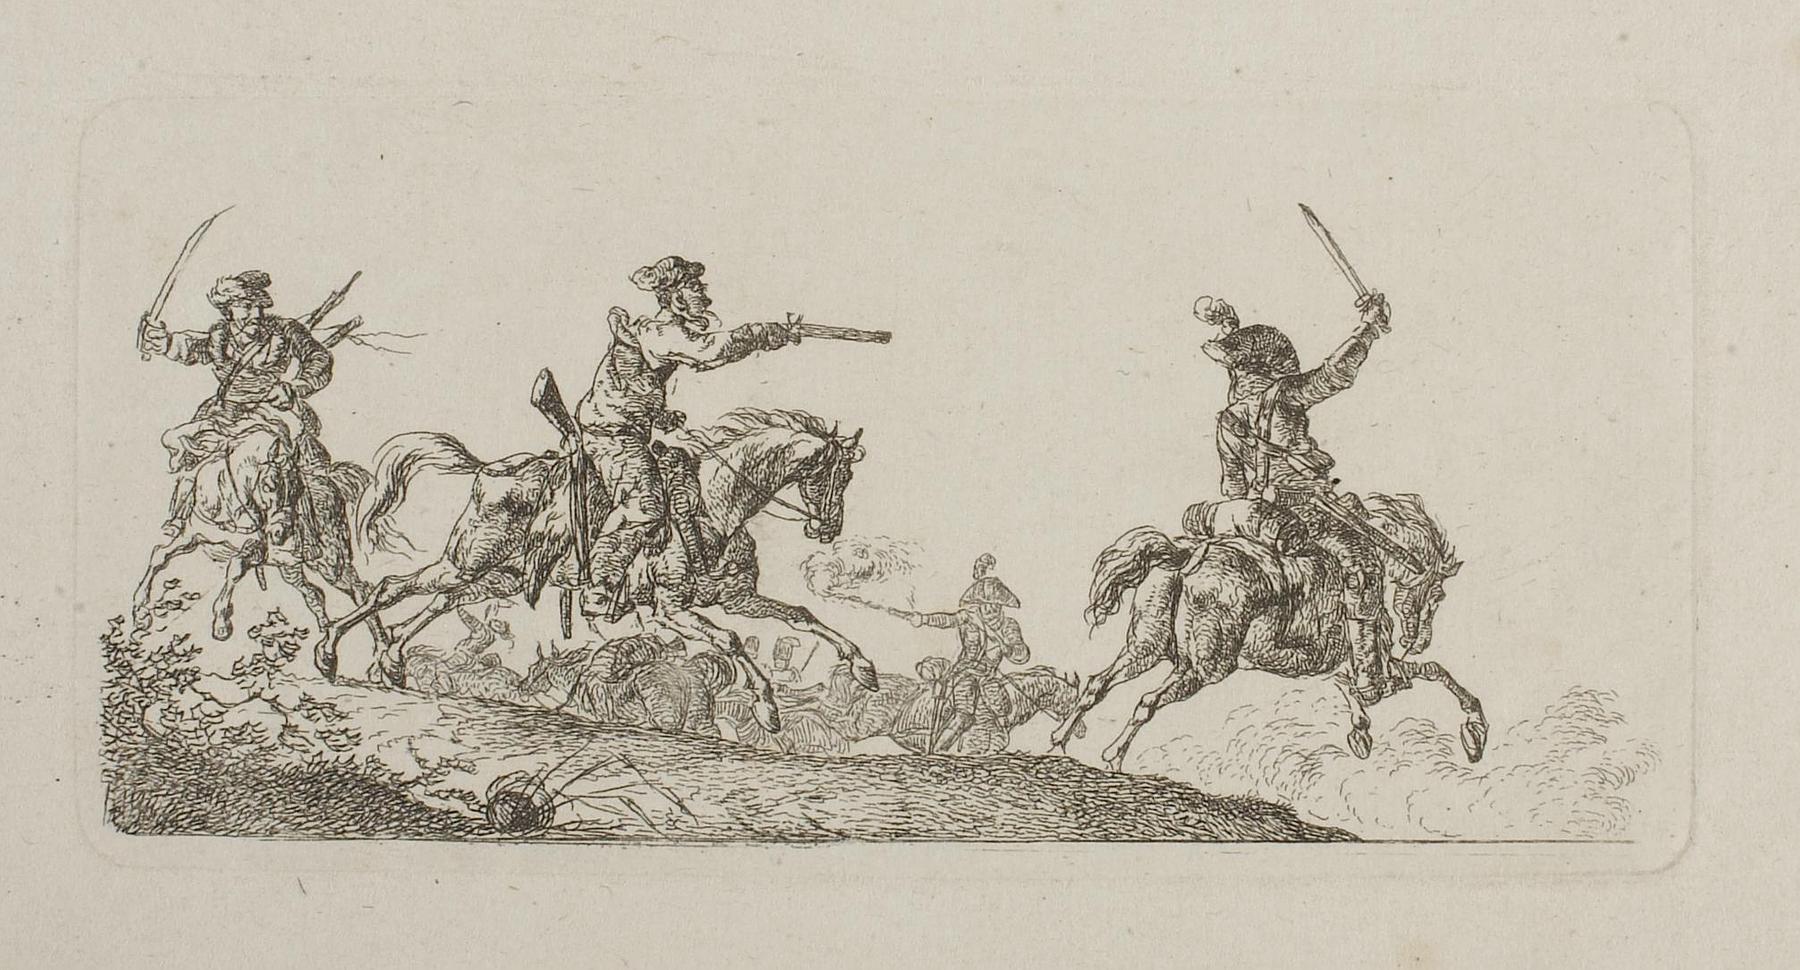 Cossacks and other Riders Fighting, E567